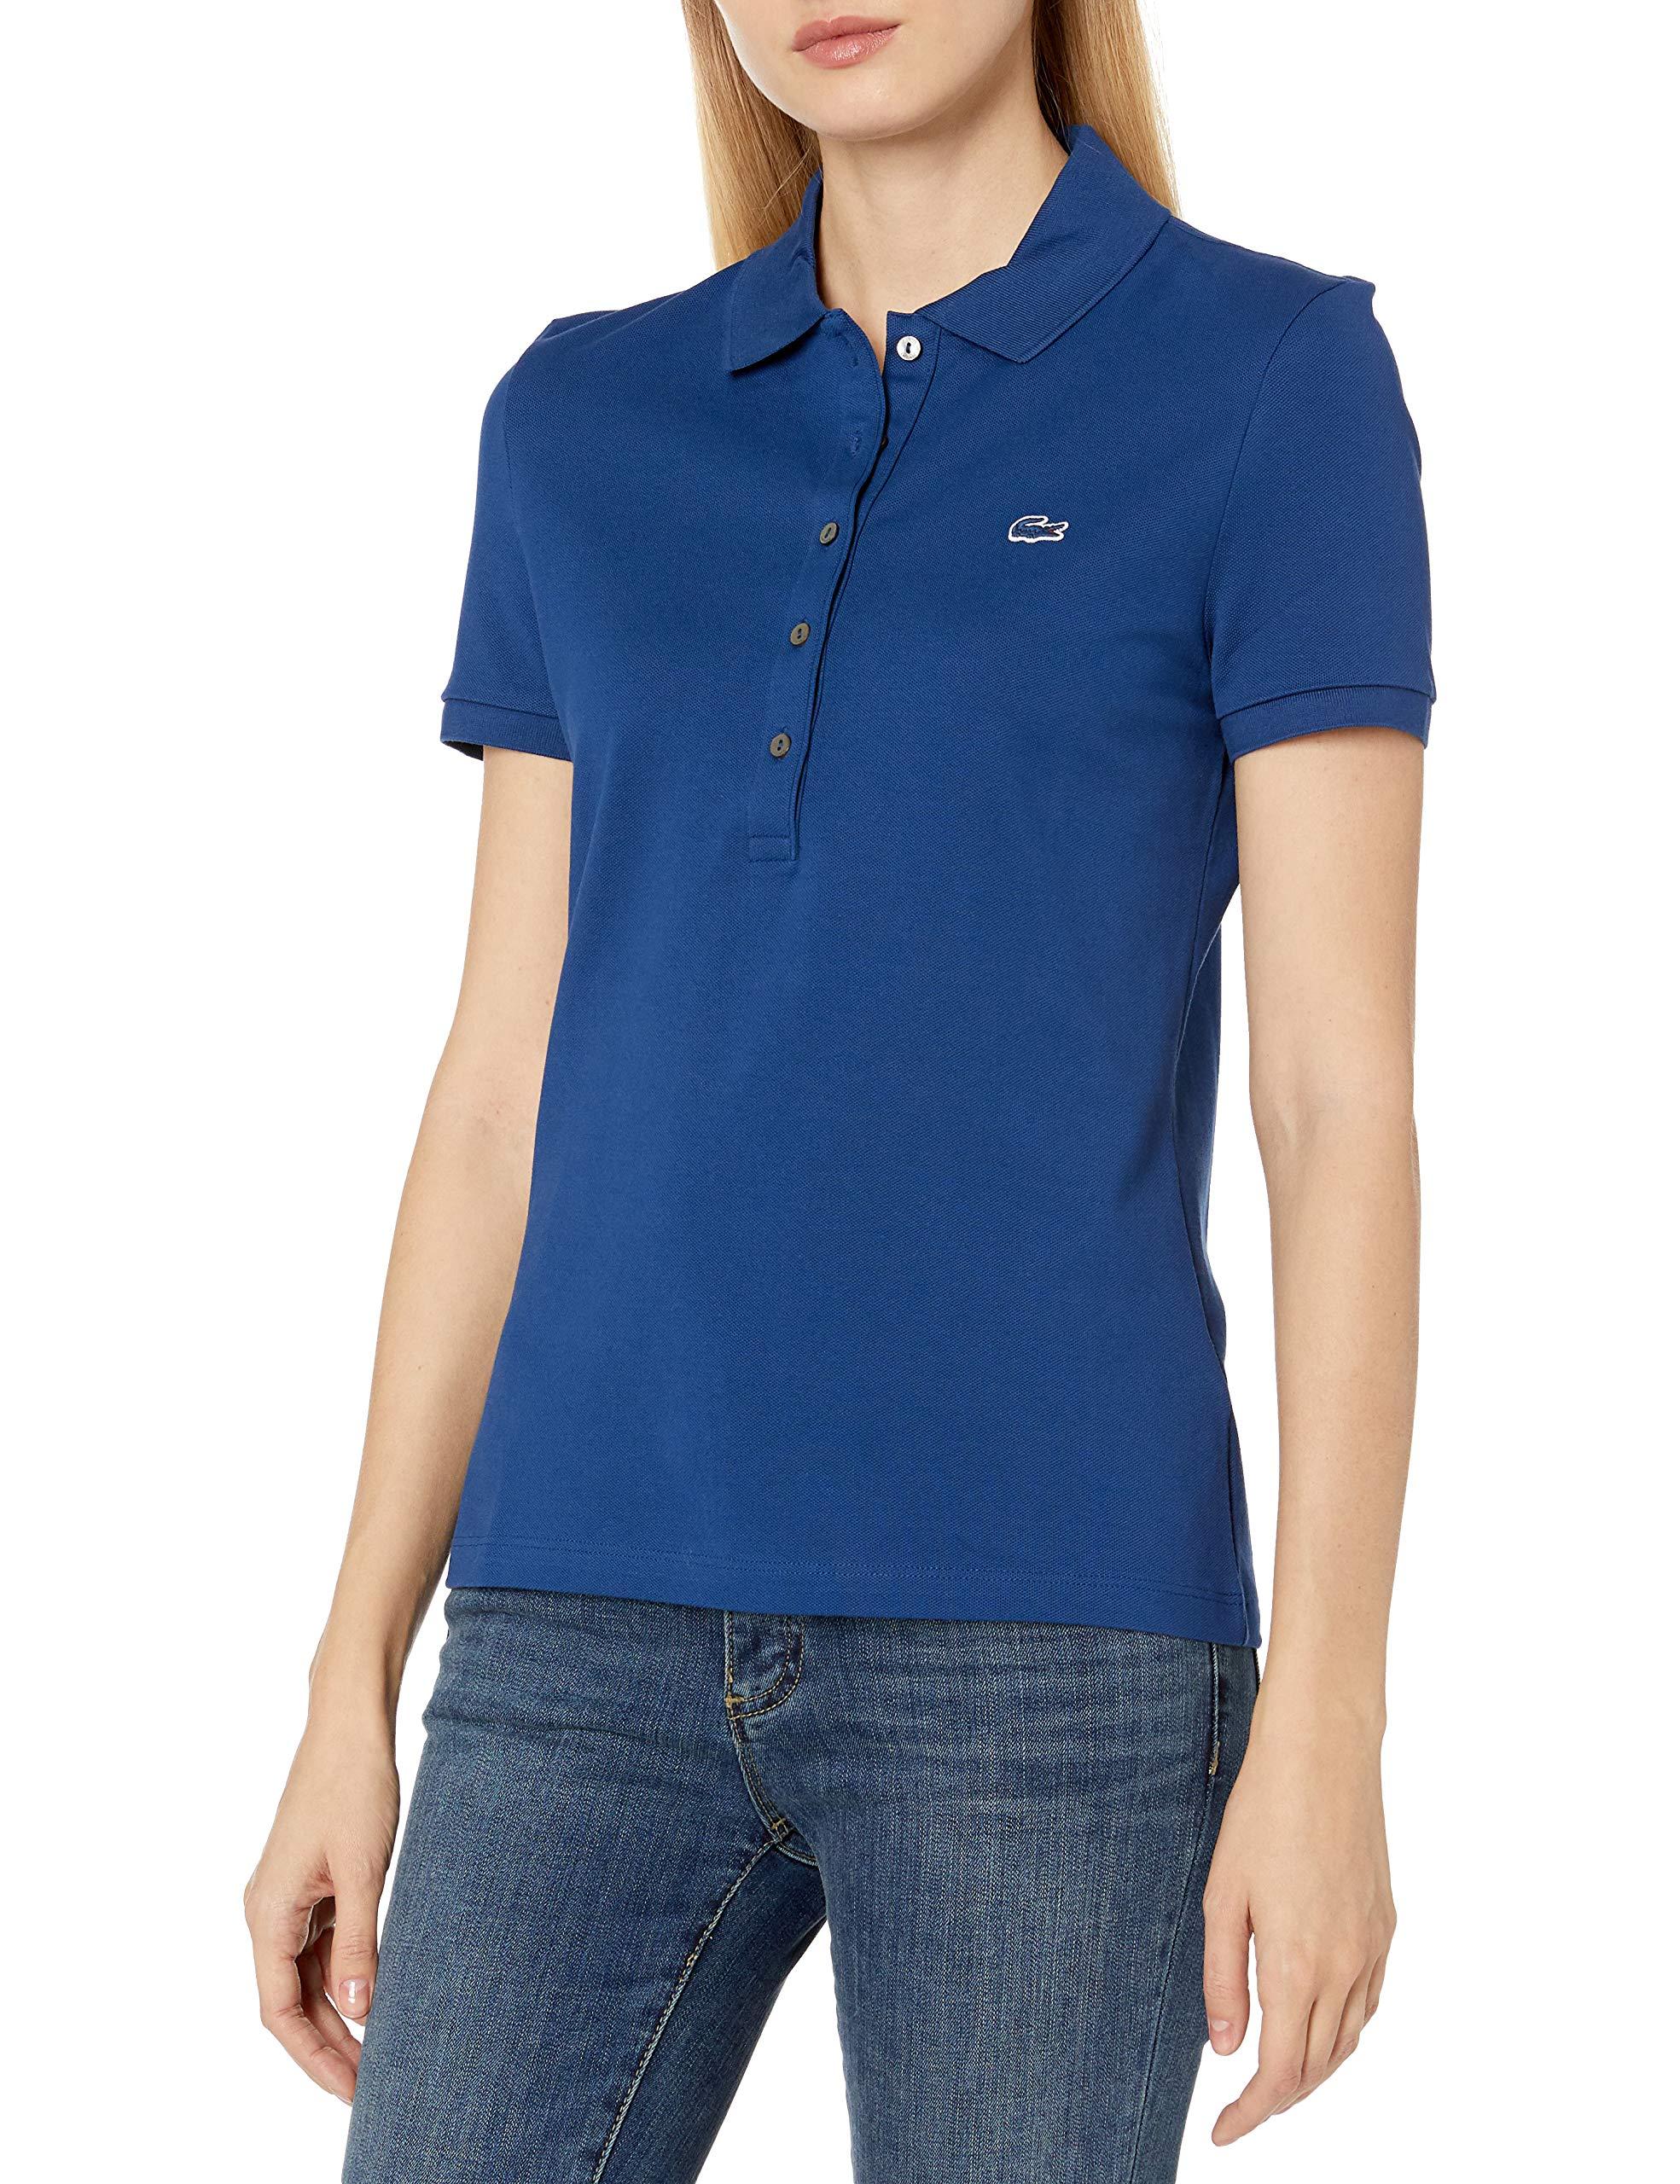 Lacoste Classic Short Sleeve Slim Fit Stretch Pique Polo in Blue | Lyst